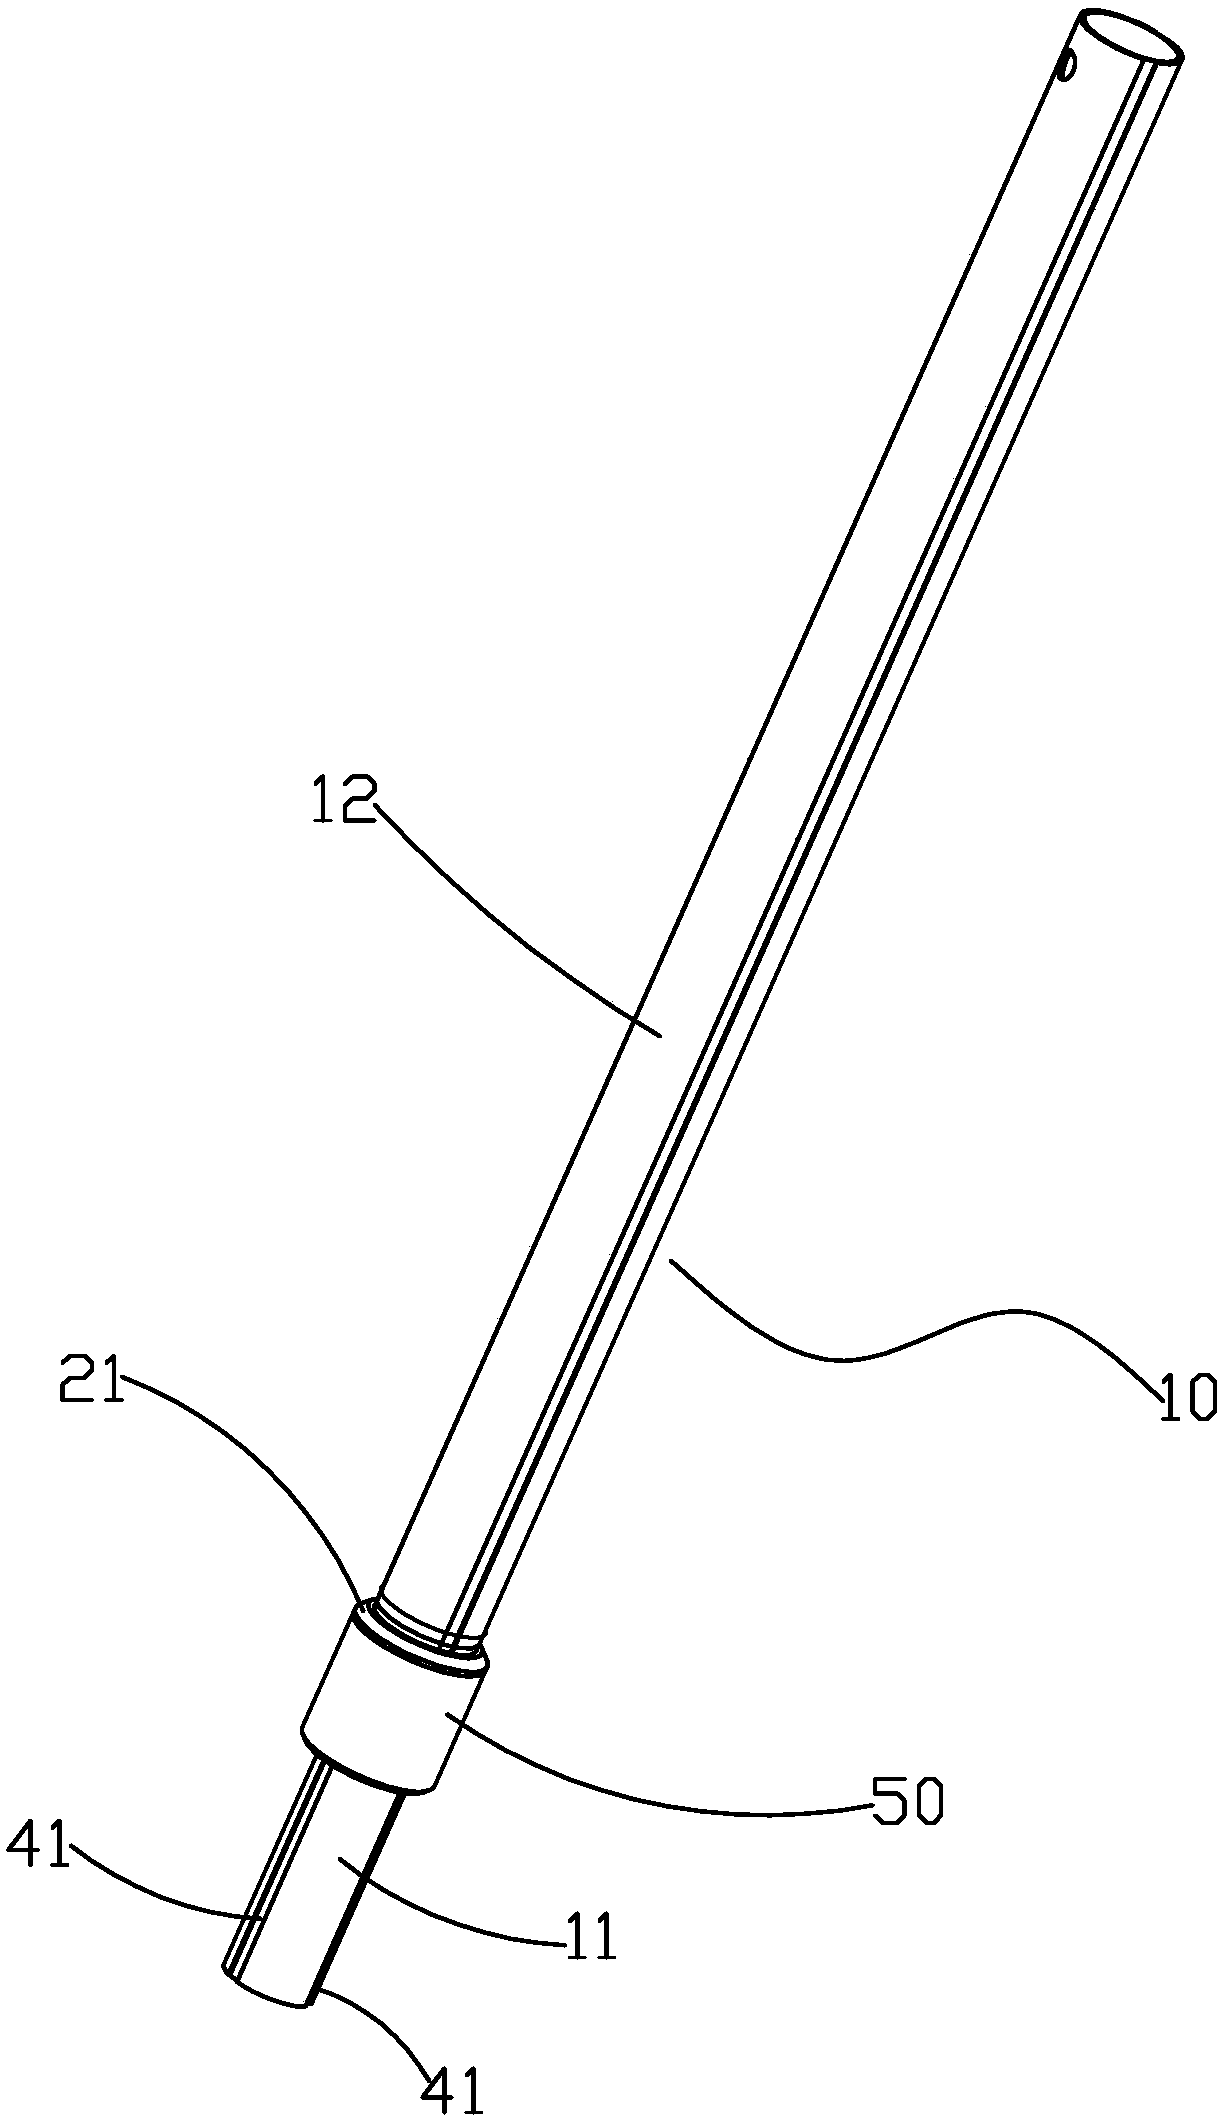 A locking structure applied to telescopic tube